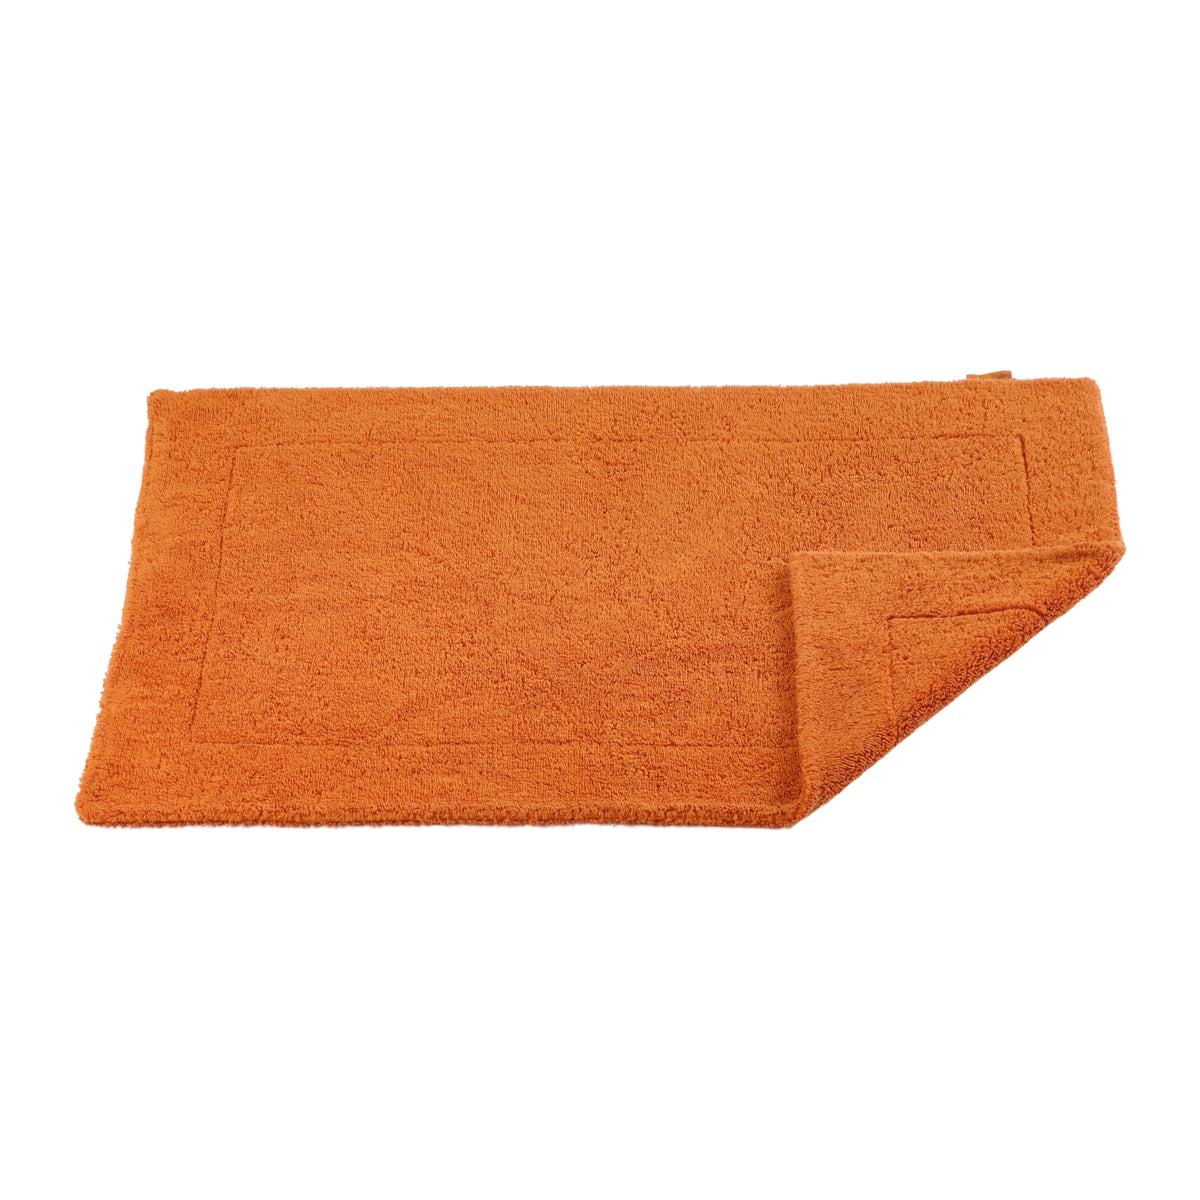 Abyss Super Pile Bath Towels and Mats - Tangerine (614)